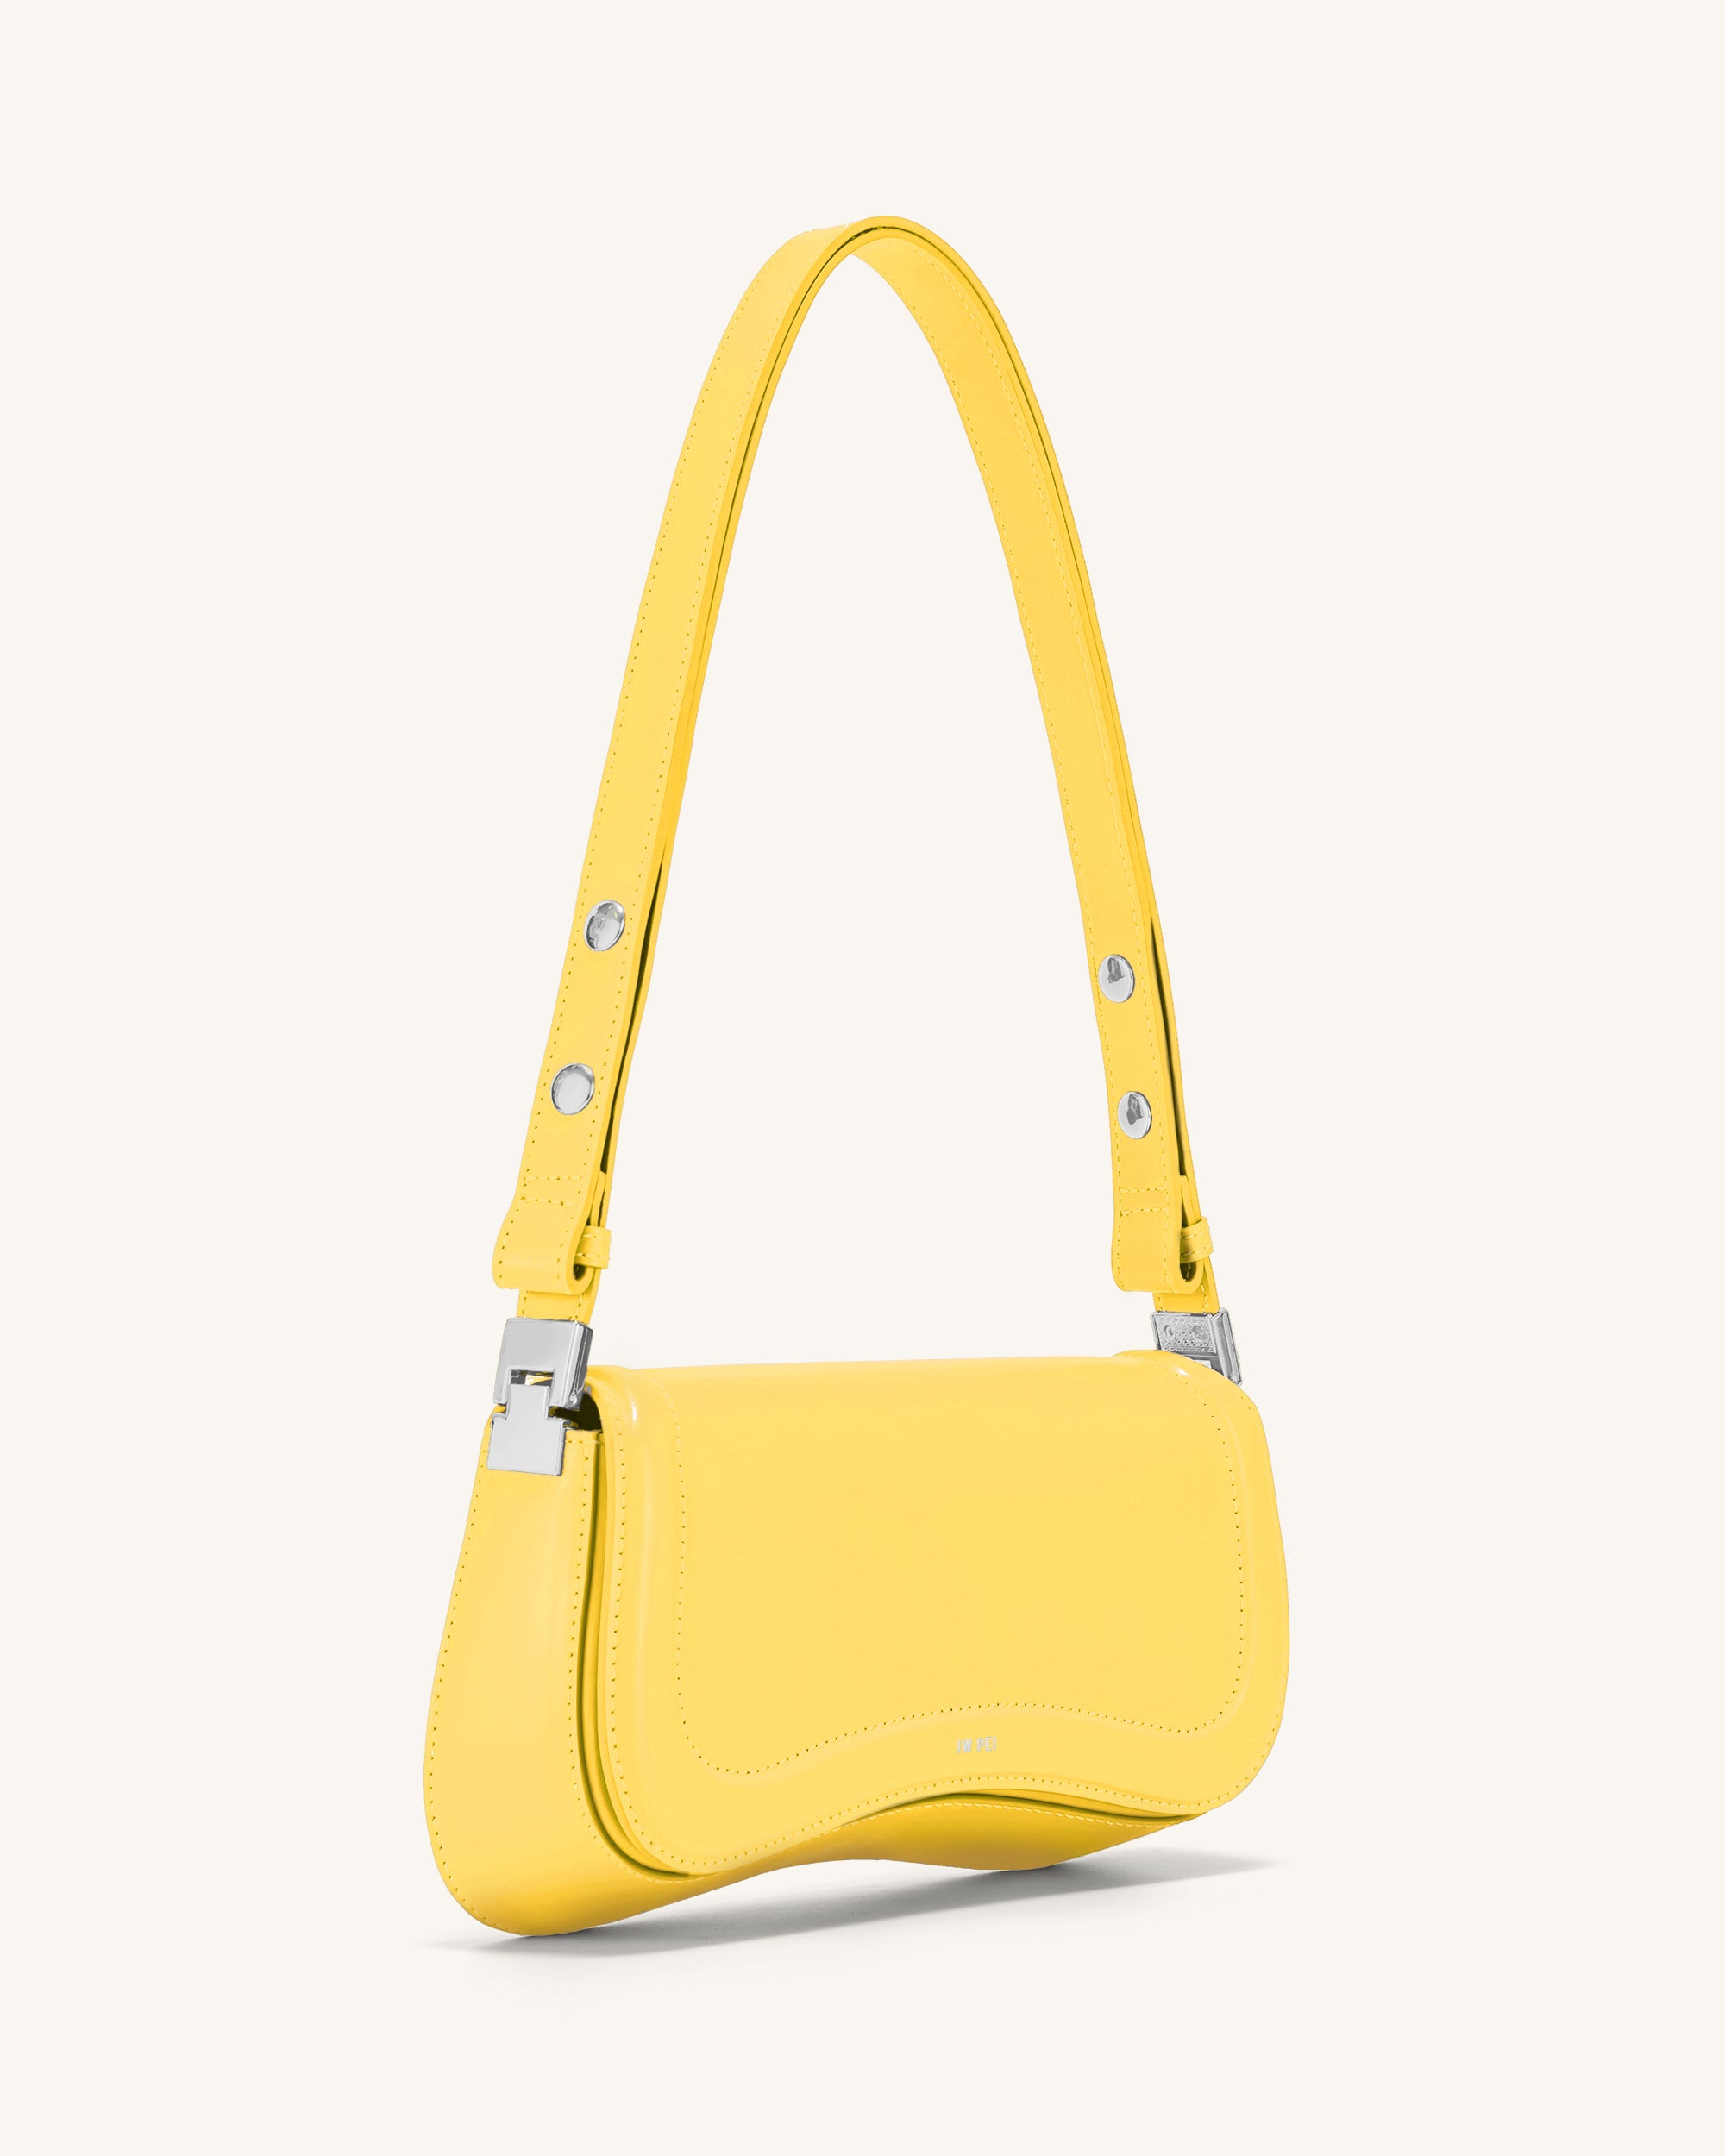 What To Wear With A Yellow Handbag - Zatchels' Style Guide